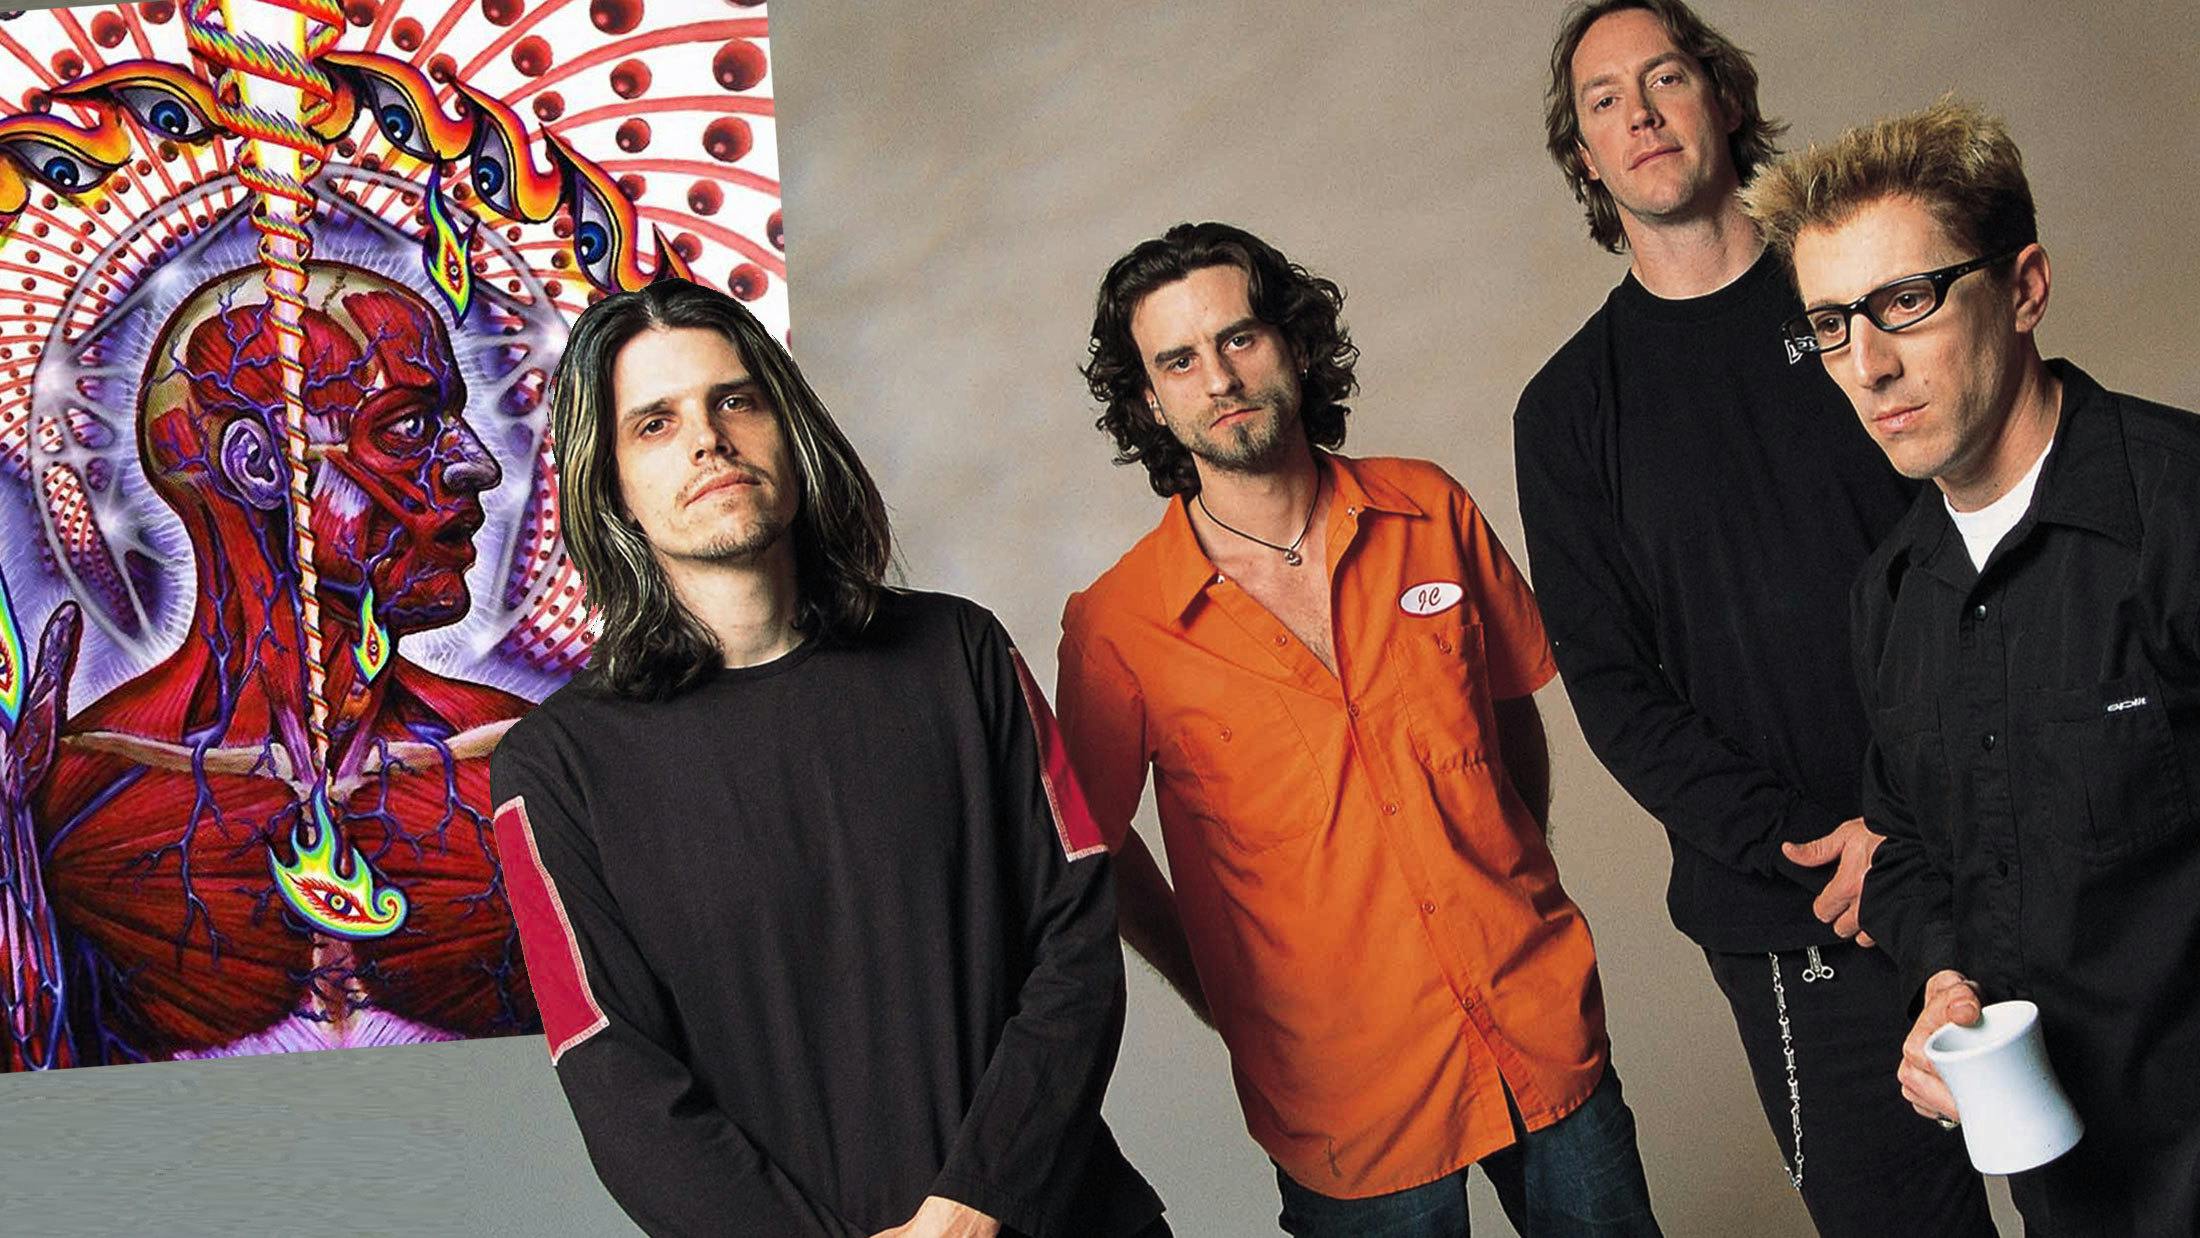 Why Some Tool Fans Think Their Lateralus Album Is Hiding A Huge Secret